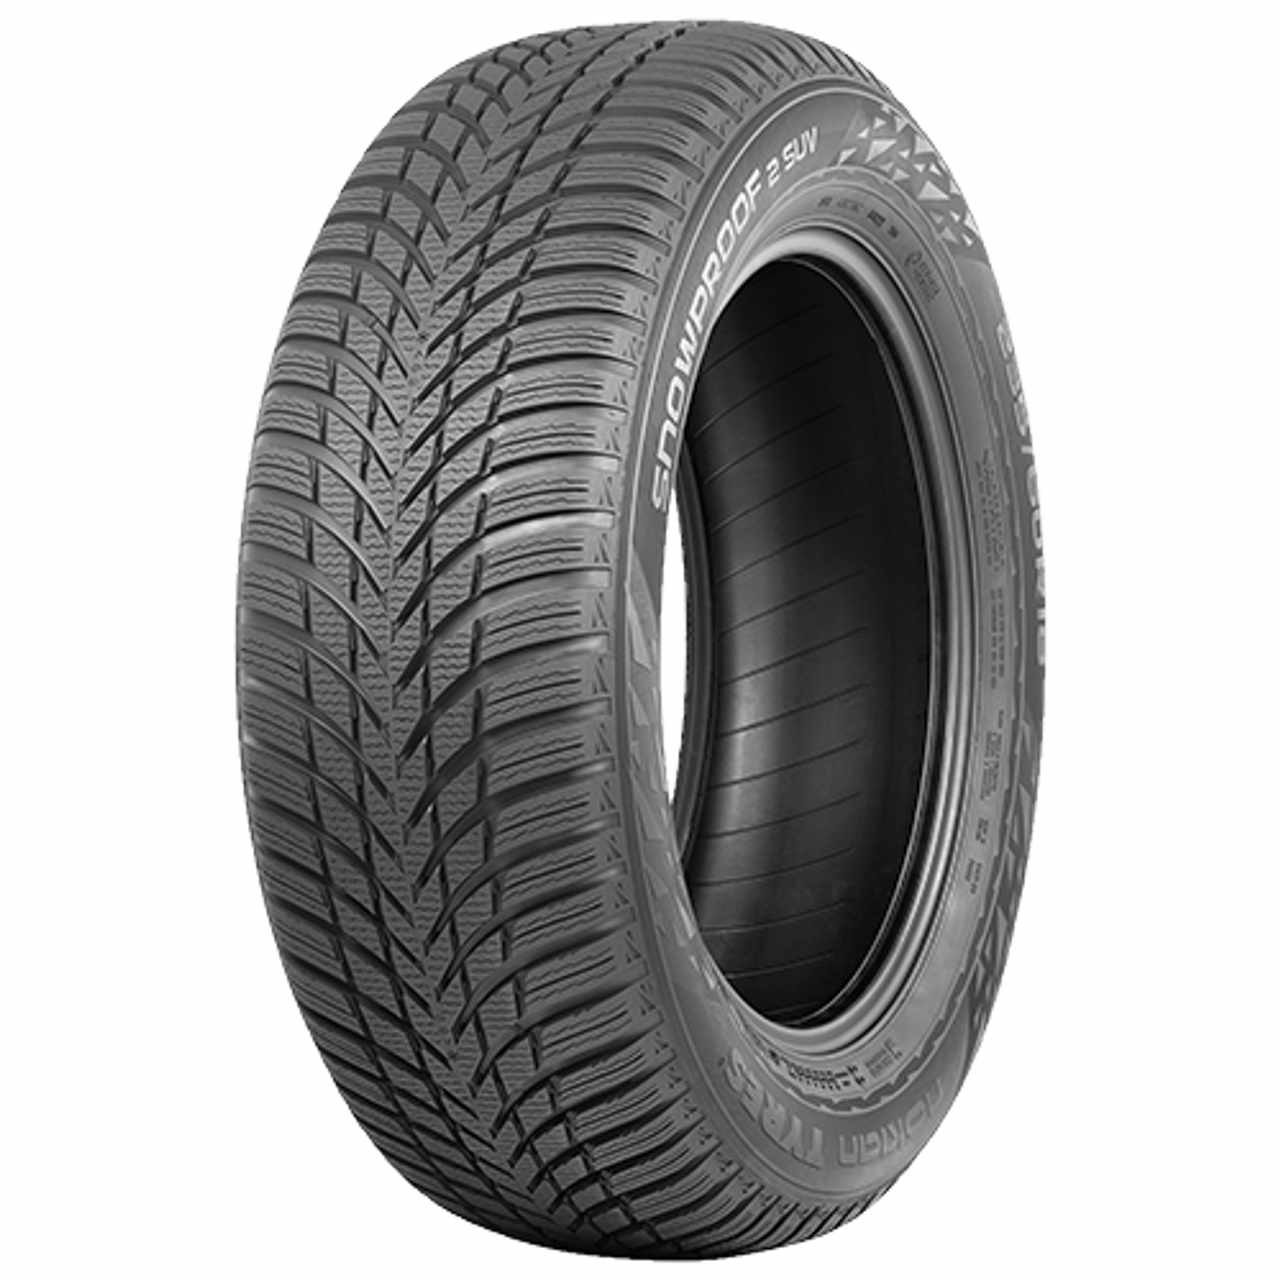 NOKIAN SNOWPROOF 2 SUV 215/65R17 99H BSW